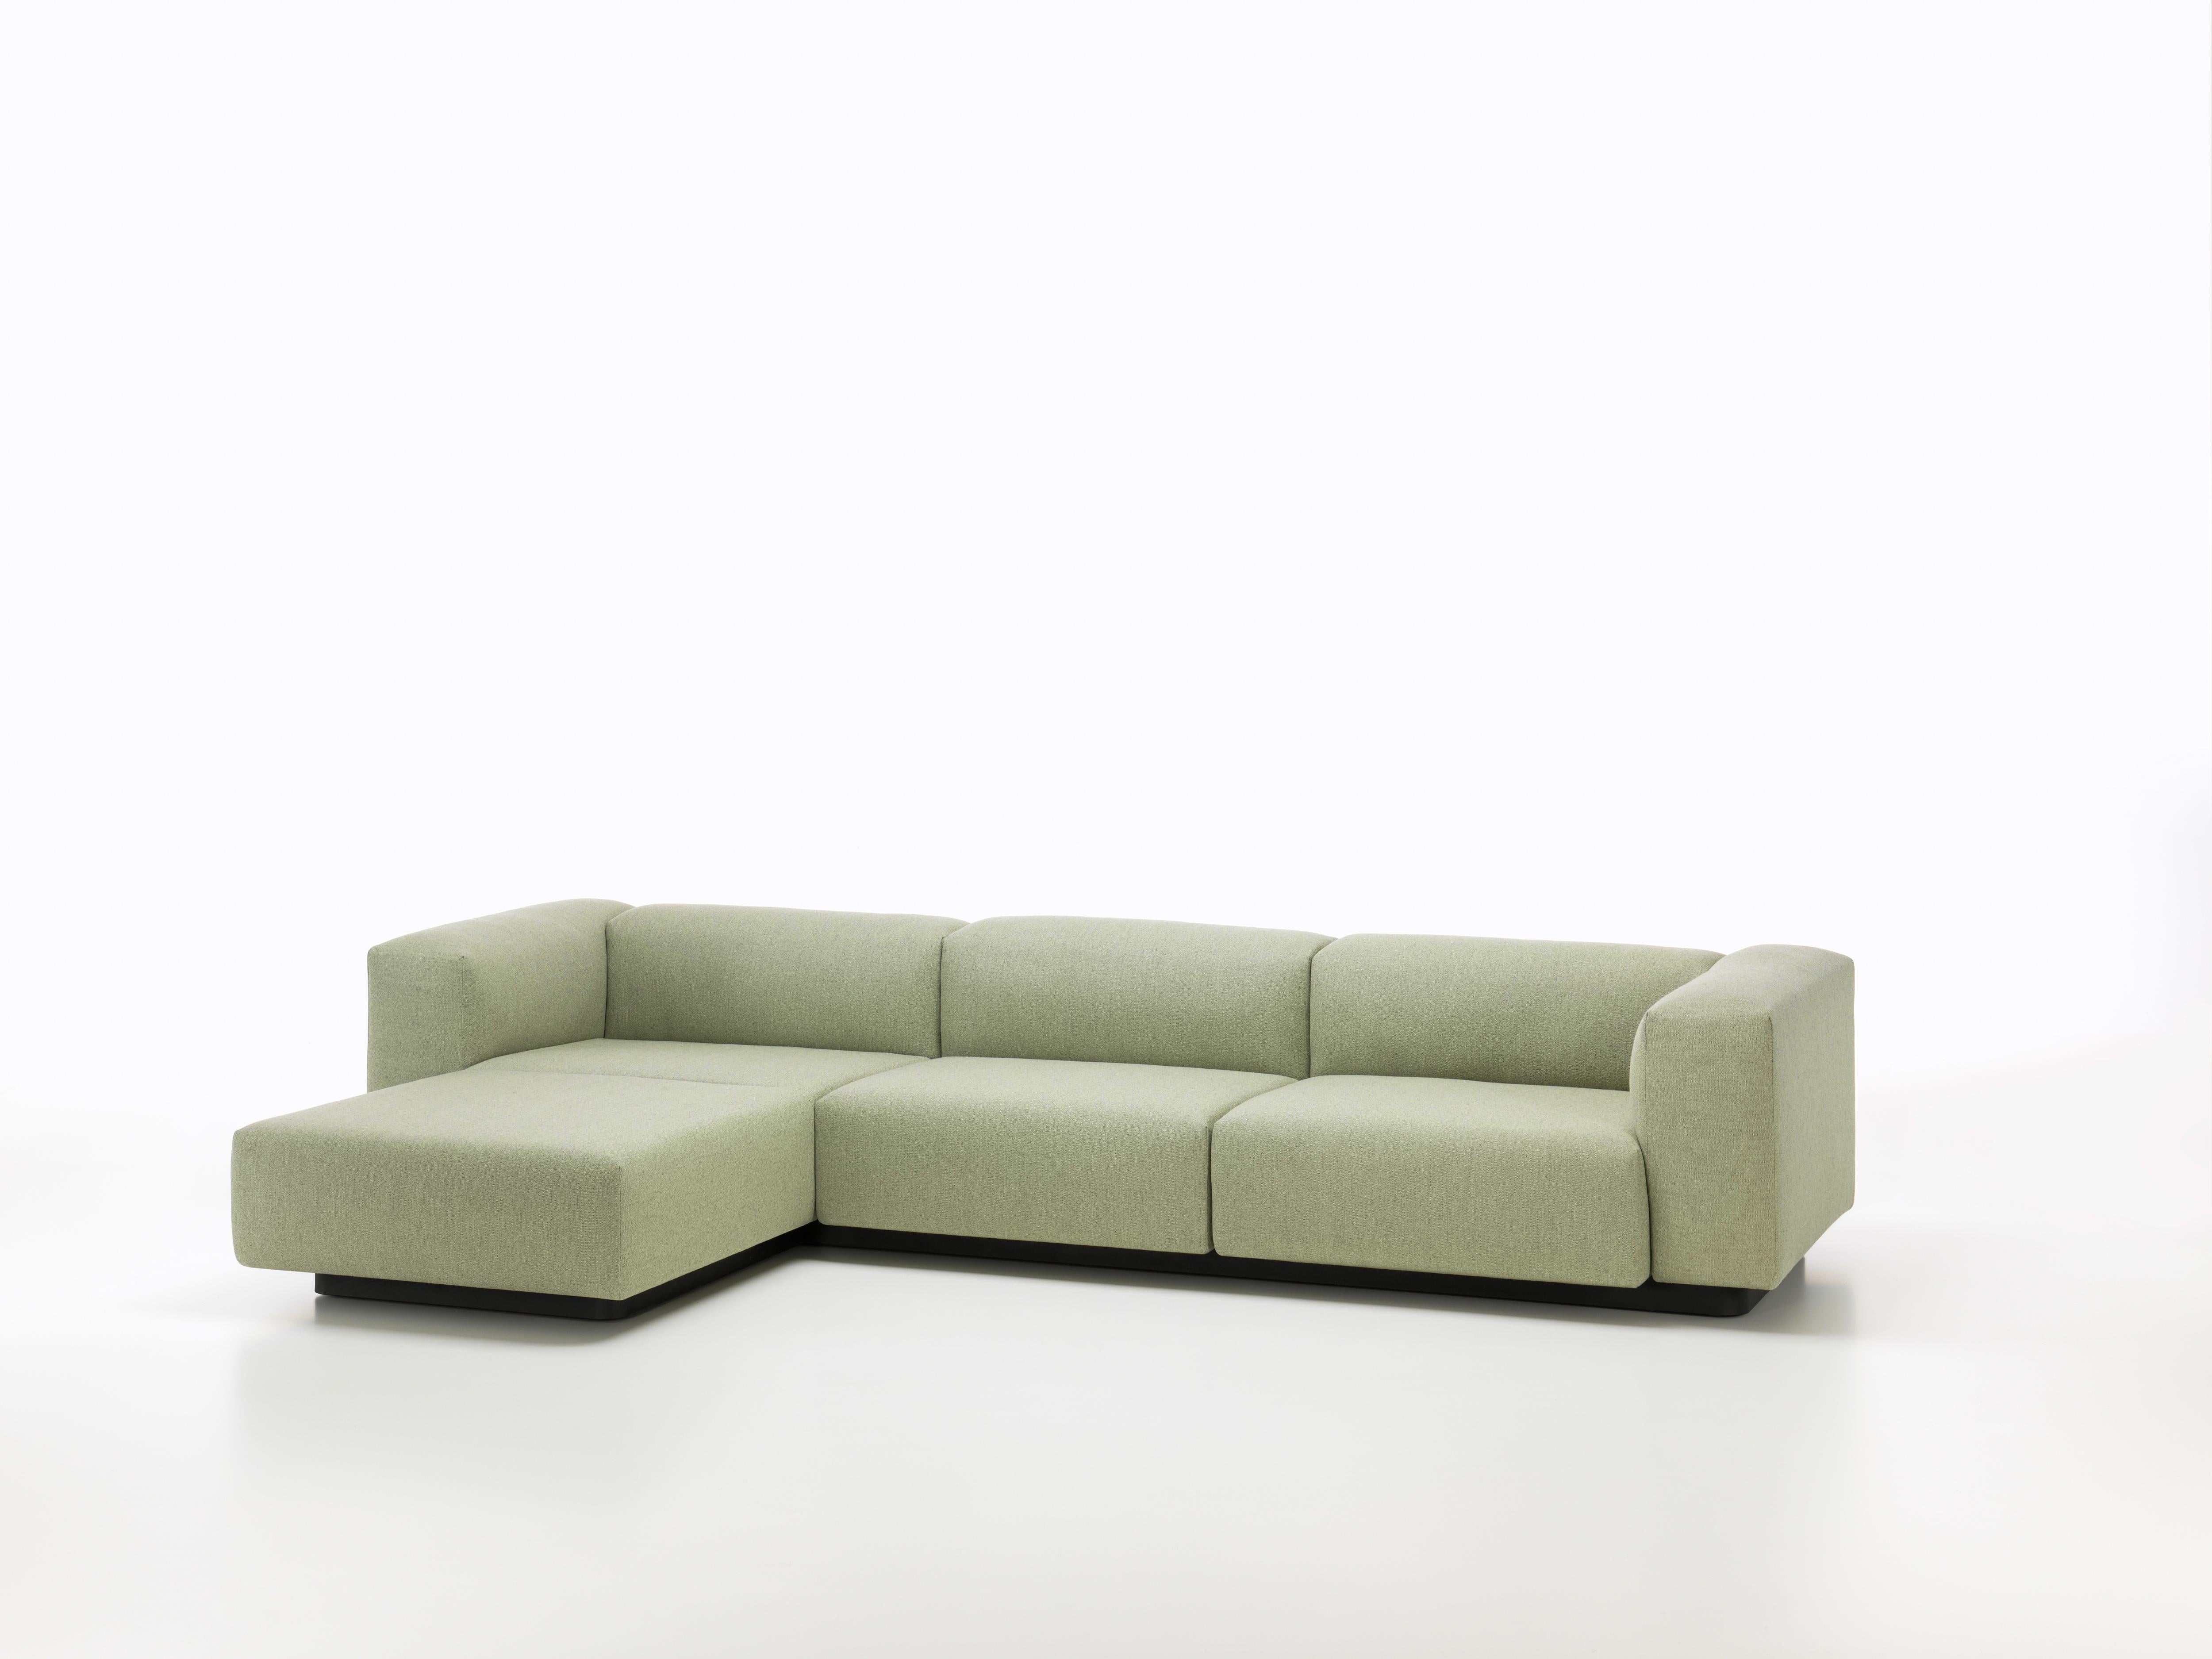 These items are only available in the United States.

The Soft Modular Sofa is Jasper Morrison‘s updated interpretation of what has become a modern classic: the low-slung modular sofa with a decidedly horizontal emphasis. Uniting carefully